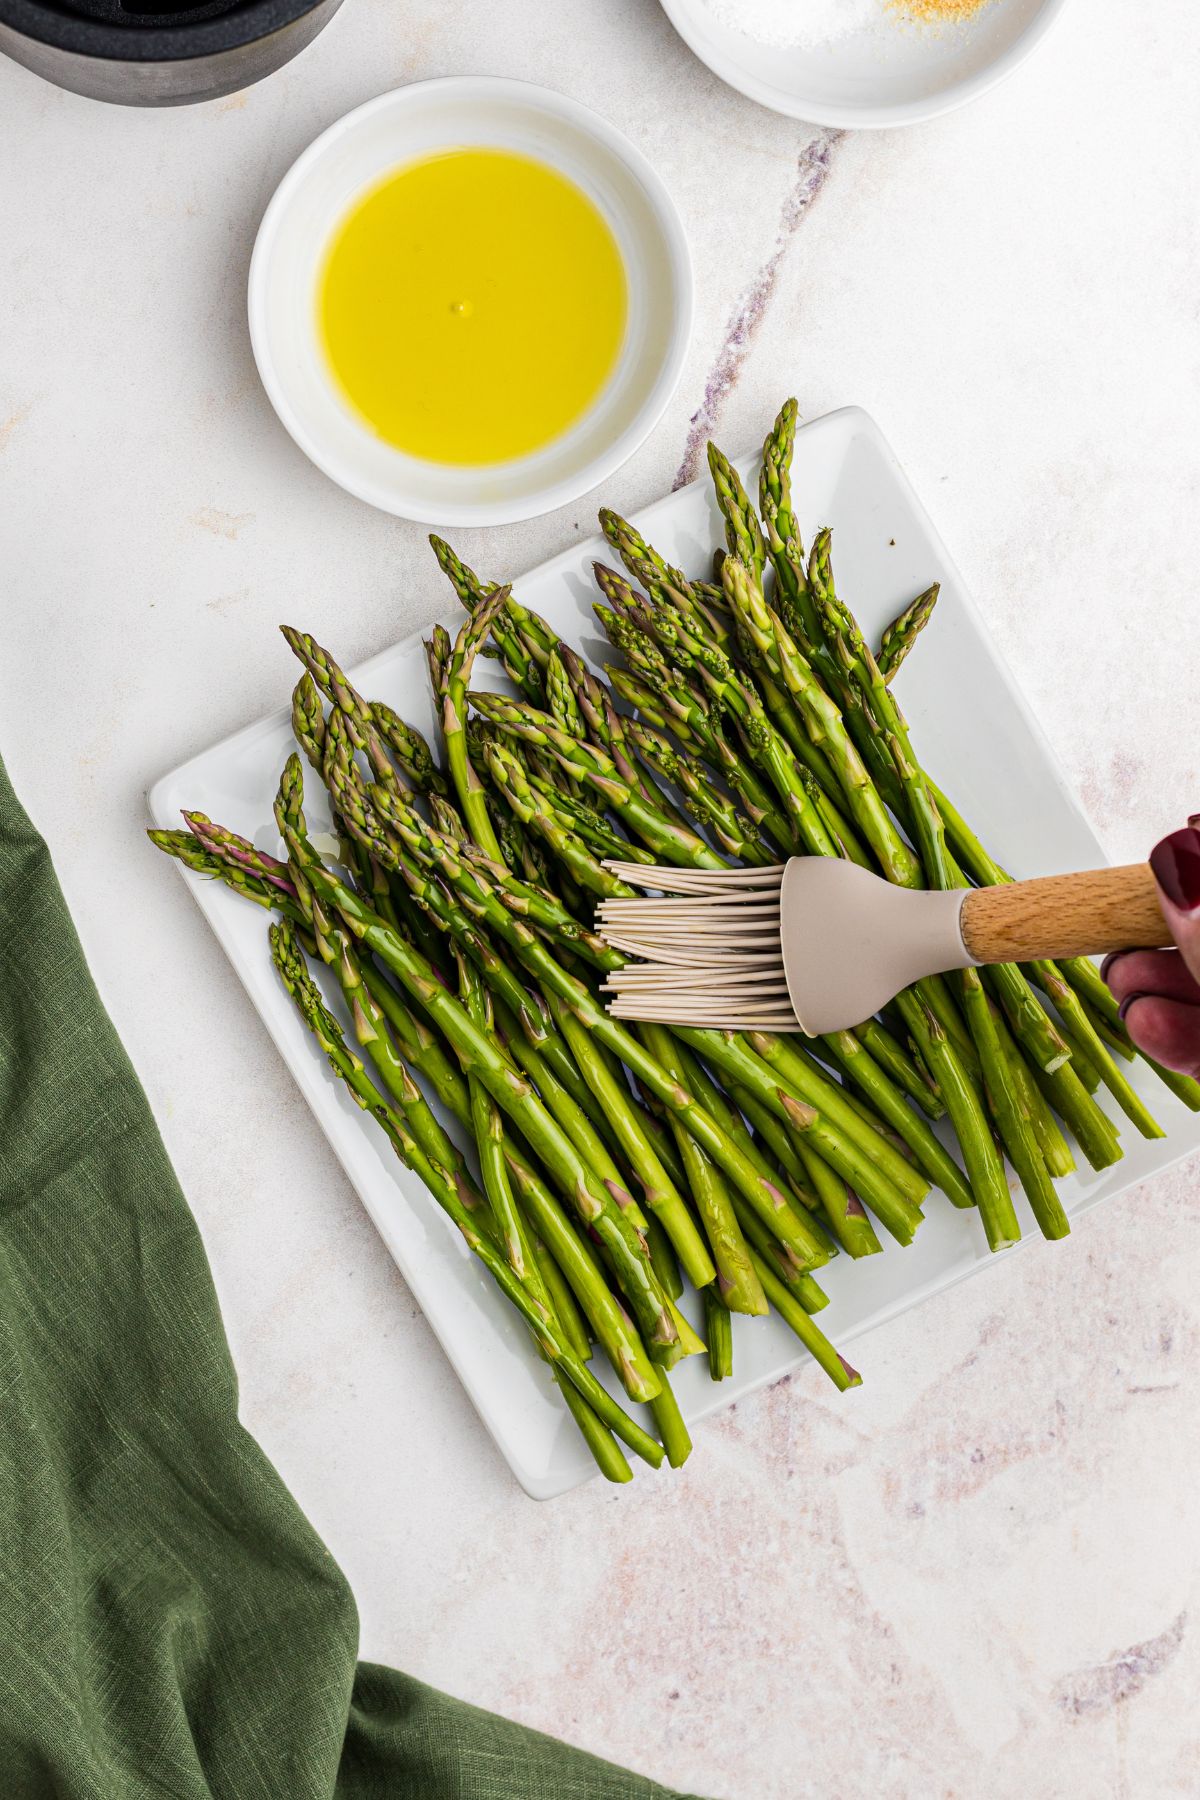 Asparagus being brushed with olive oil